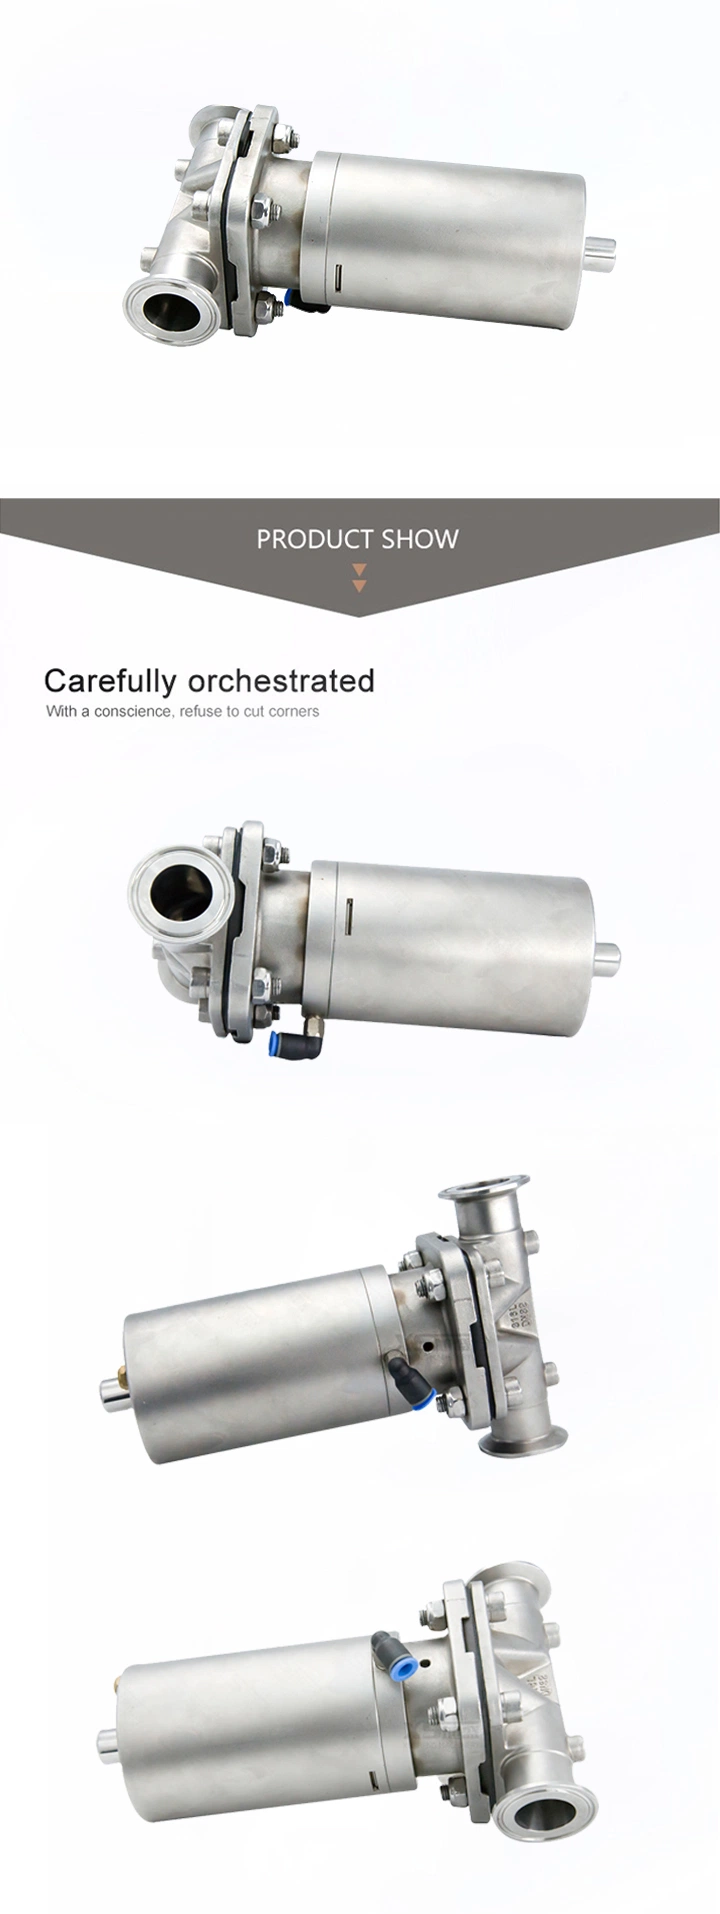 SS304 Stainless Steel Sanitary Pneumatic Tri-Clamped Diaphragm Valve with Mini Actuator